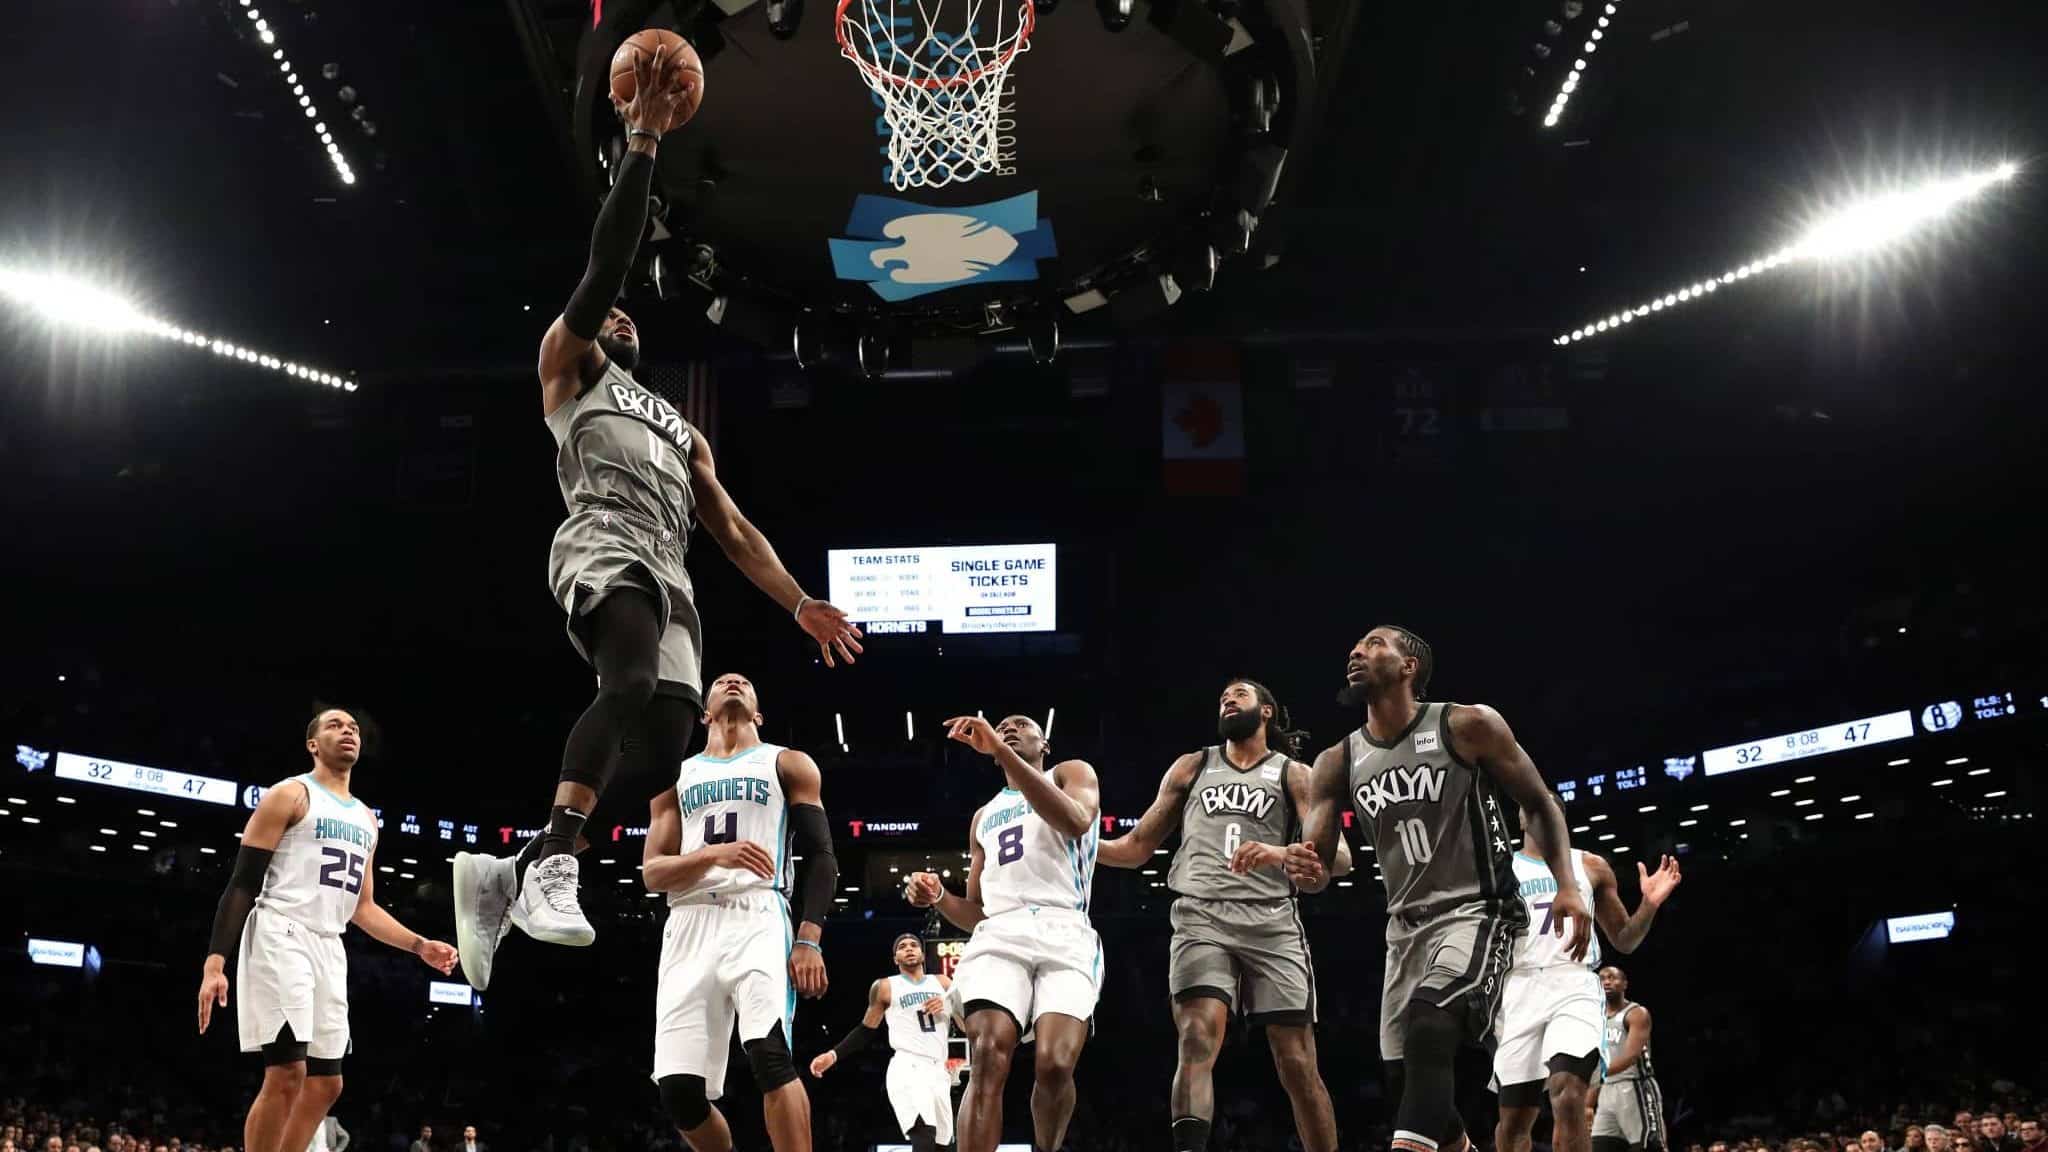 NEW YORK, NEW YORK - DECEMBER 11: David Nwaba #0 of the Brooklyn Nets goes in for a layup during the first half of their game against the Charlotte Hornets at Barclays Center on December 11, 2019 in New York City. NOTE TO USER: User expressly acknowledges and agrees that, by downloading and or using this photograph, User is consenting to the terms and conditions of the Getty Images License Agreement.